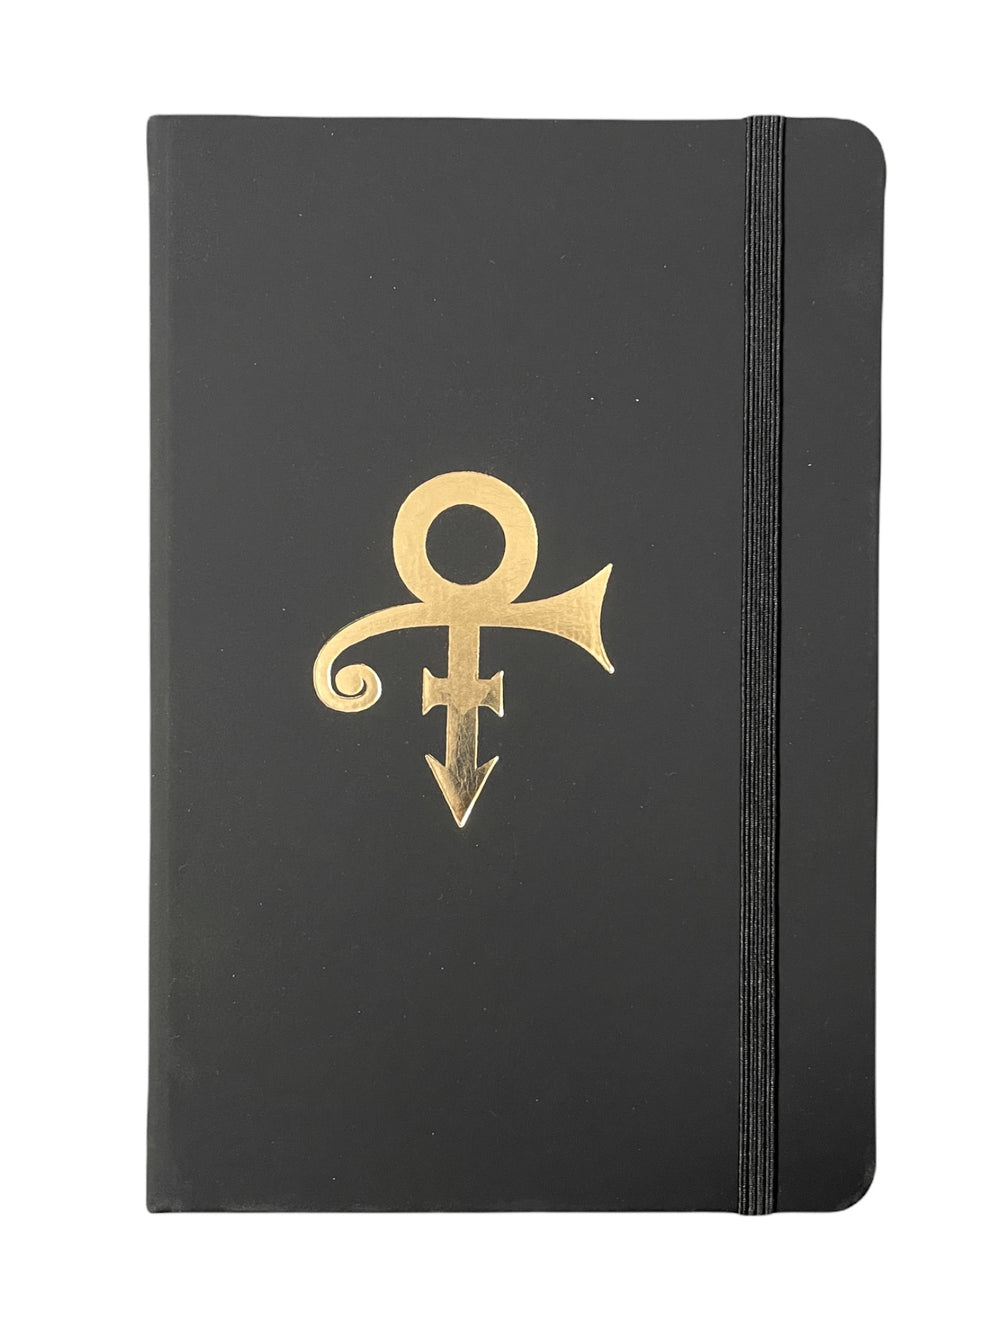 Prince – Xclusive & Official Embossed Gold Foil Love Symbol Note Book / Journal